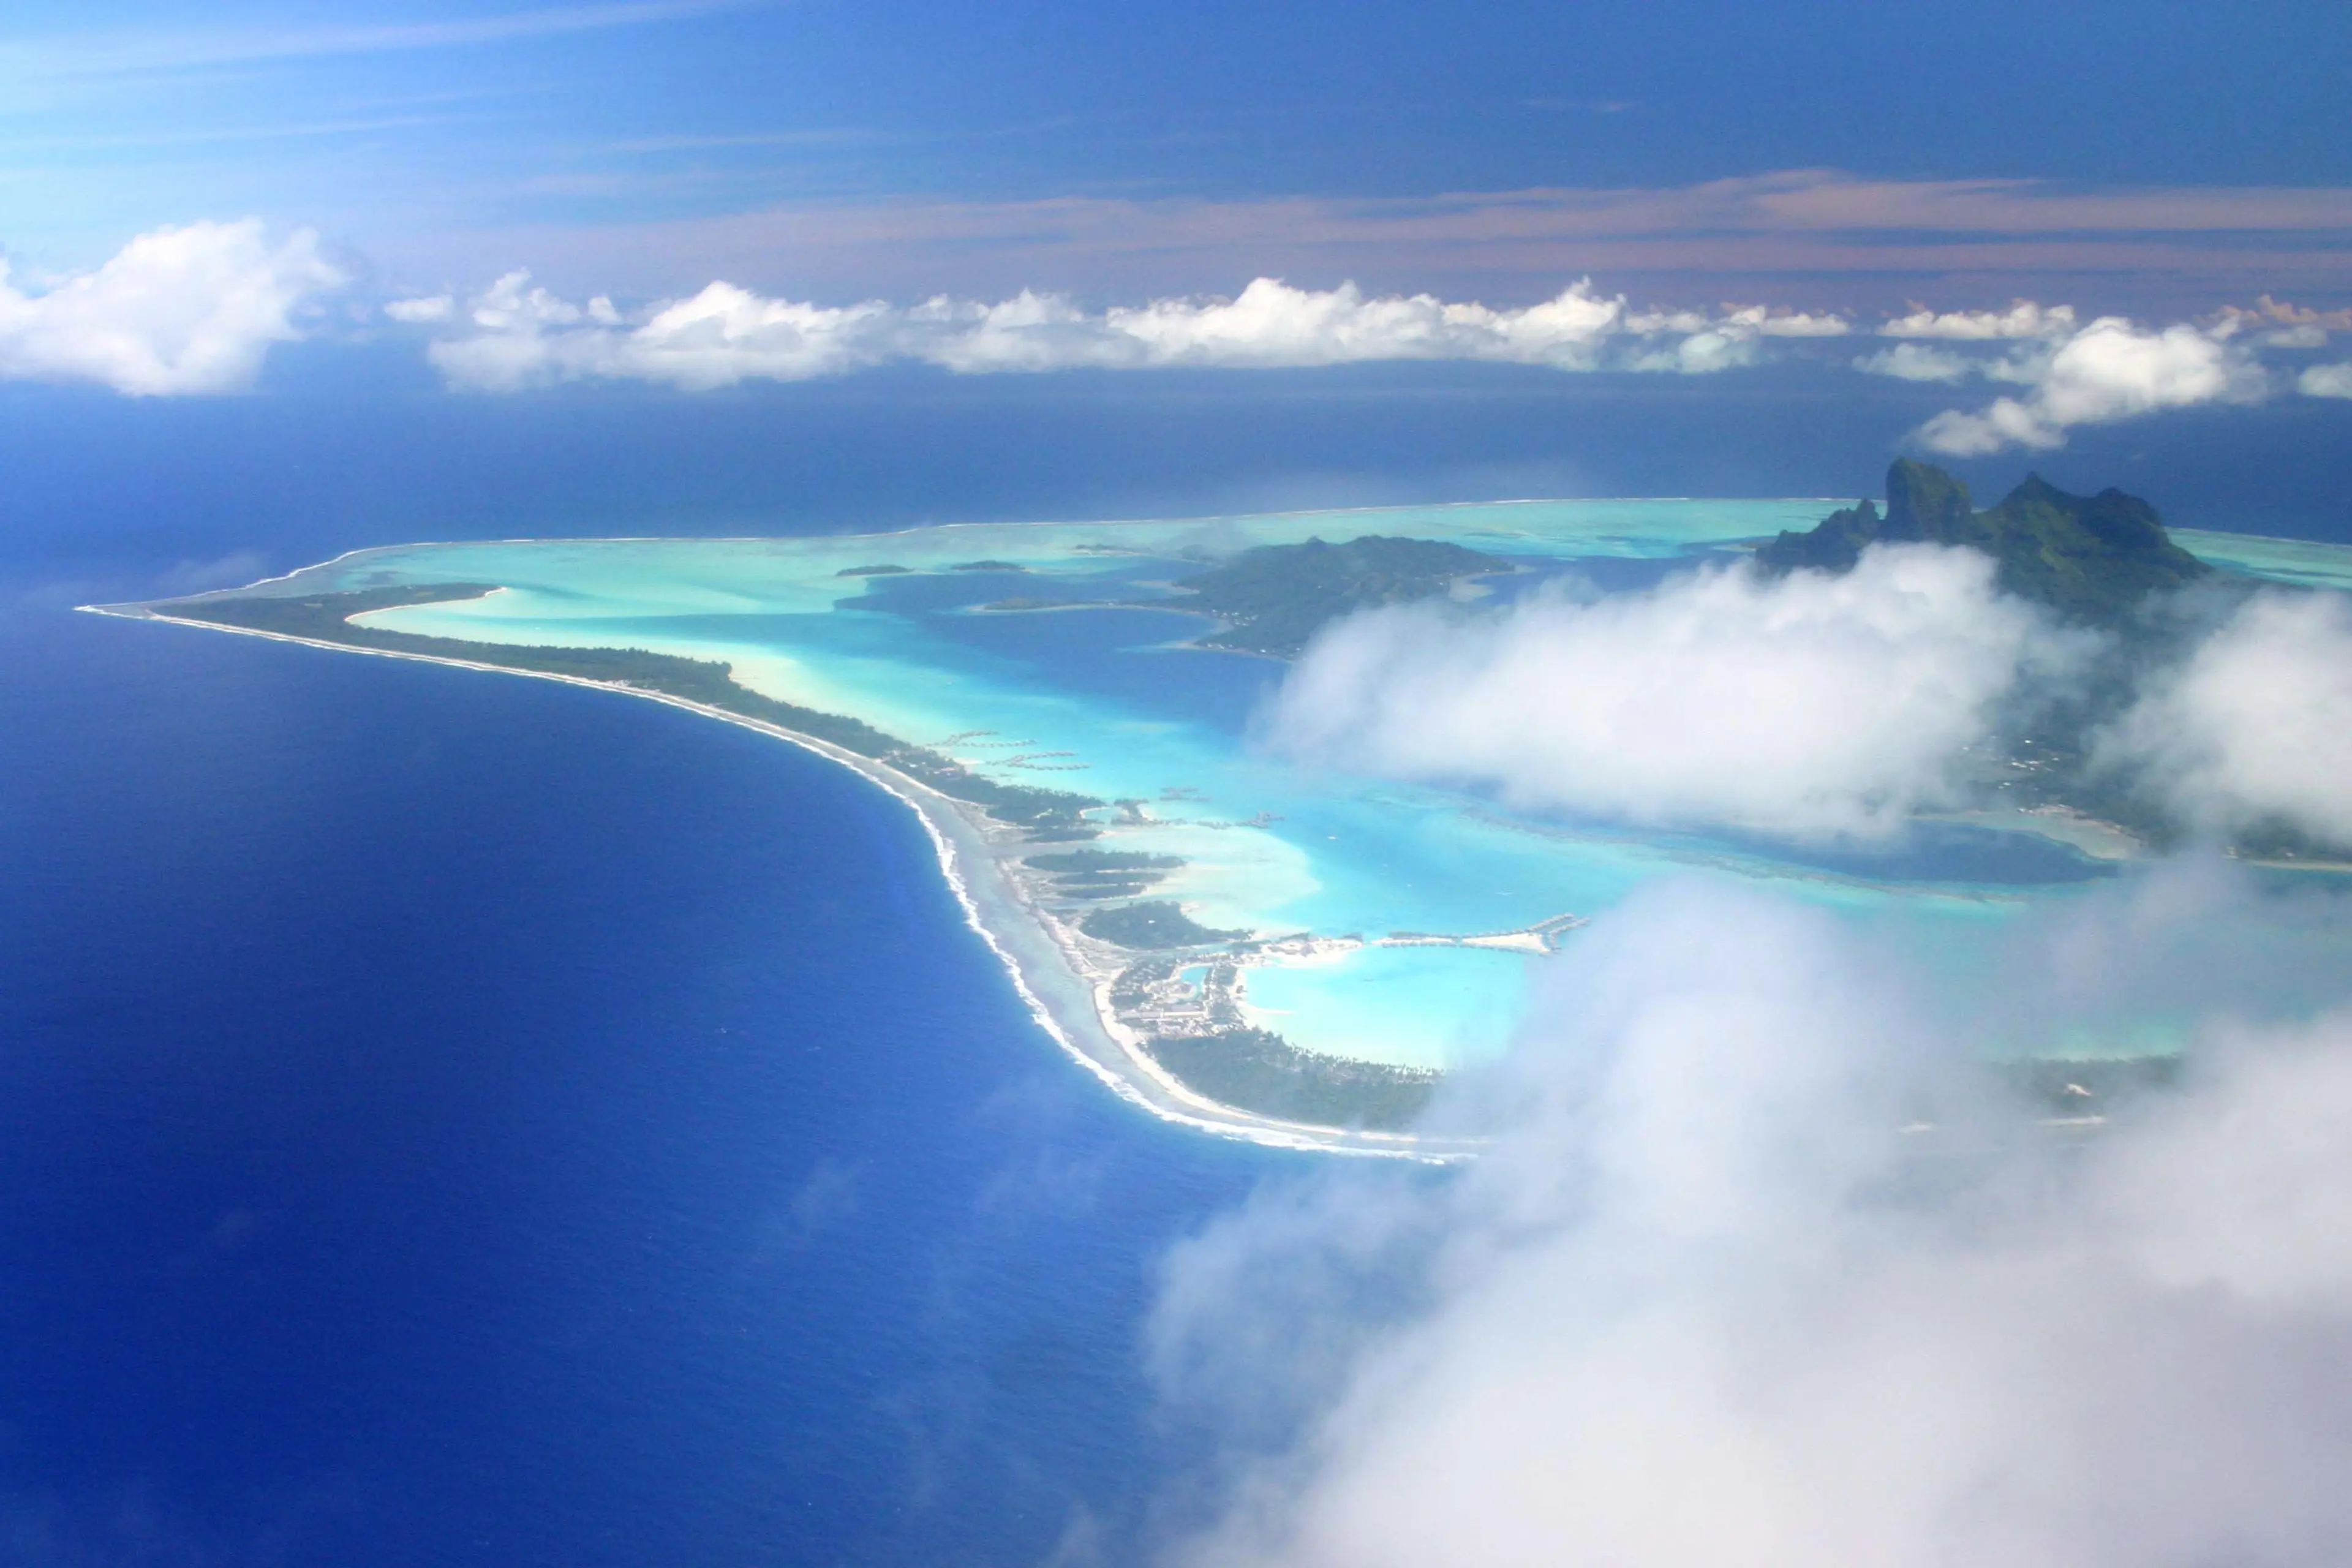 1-Day Solo Relaxation and Sightseeing Itinerary in Bora Bora